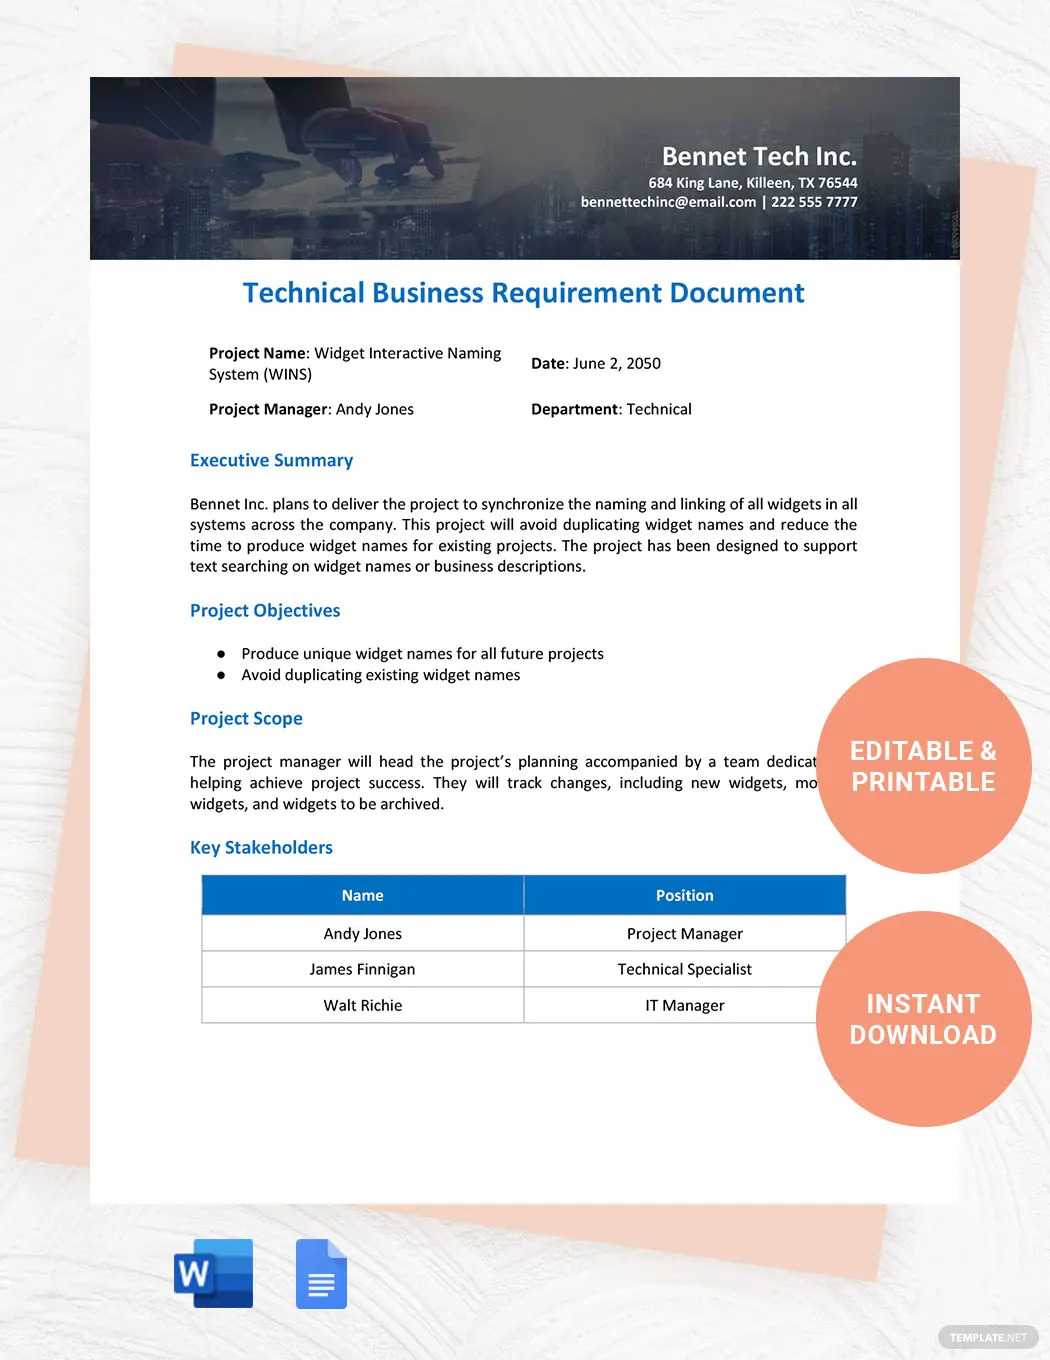 technical-business-requirements-document